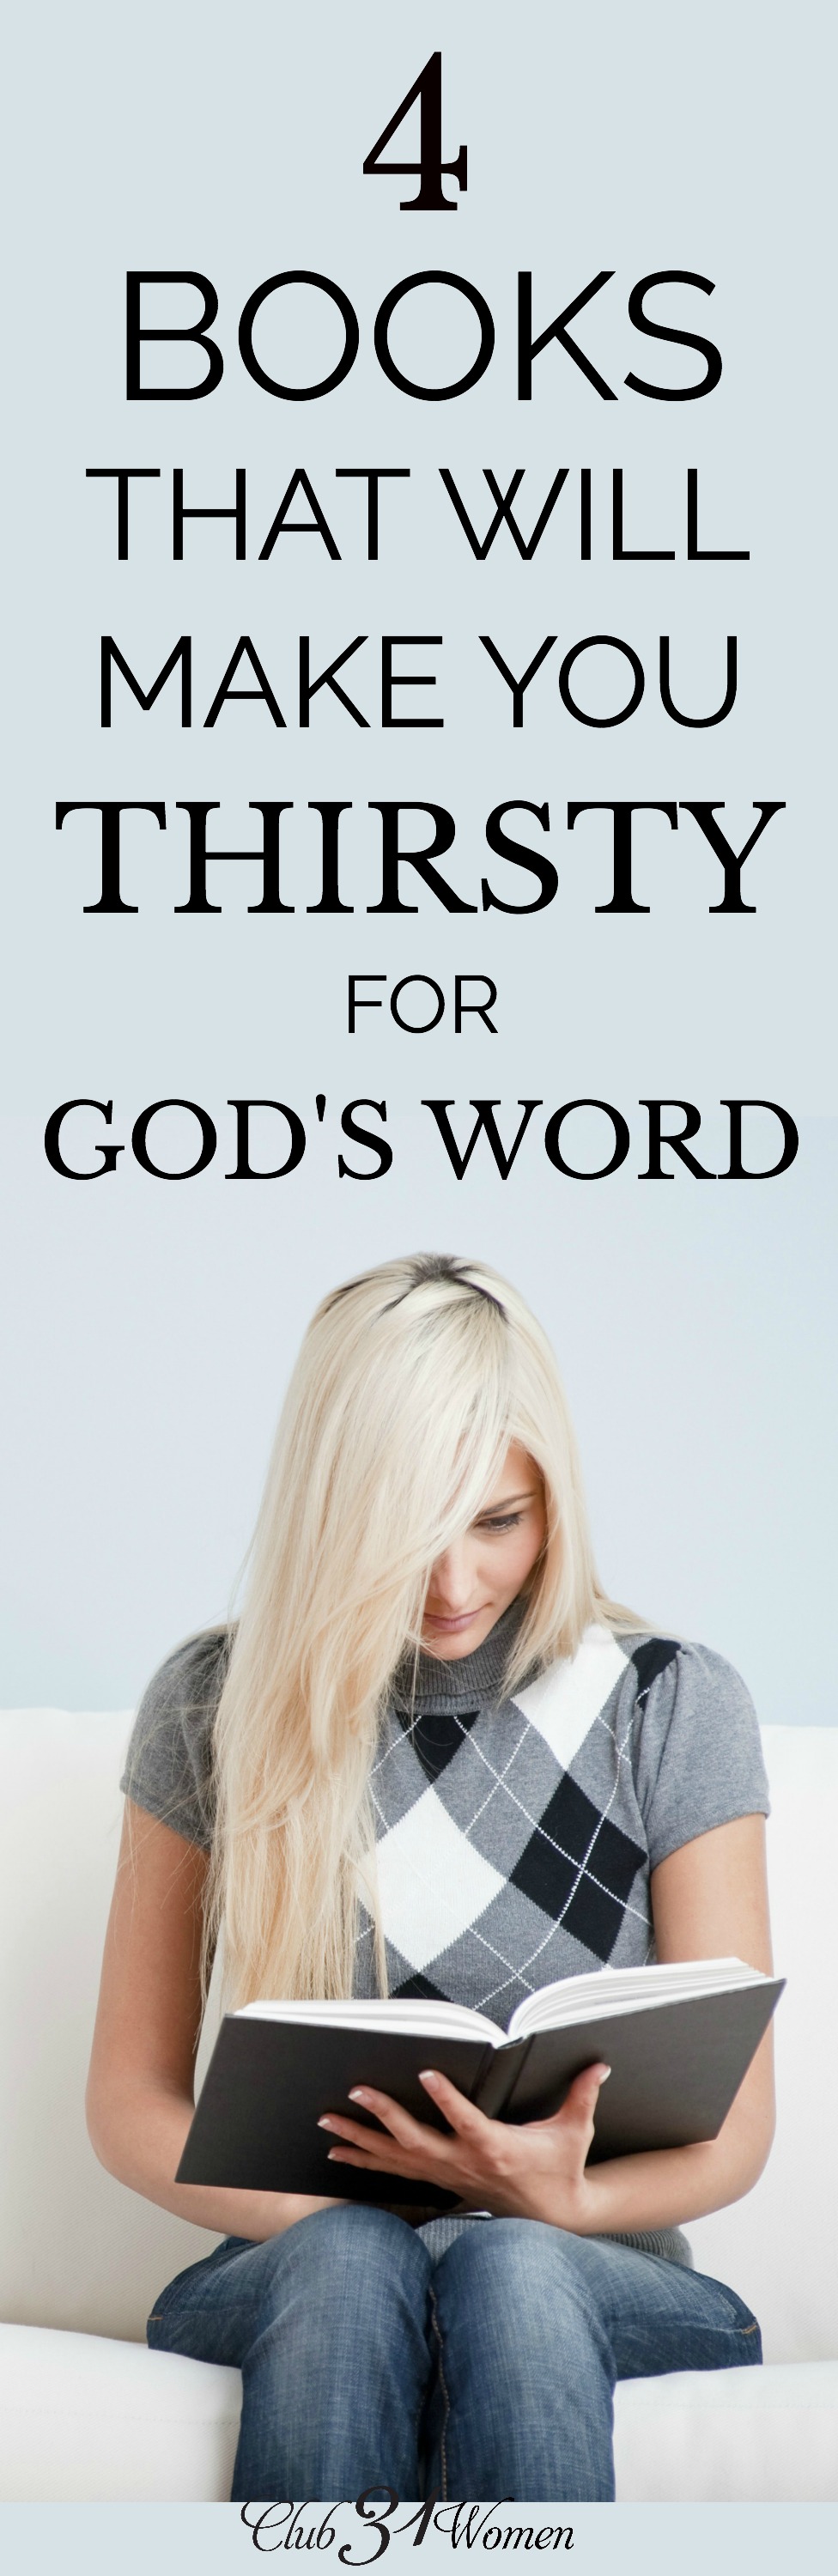 When our soul is thirsty, we need something refreshing to help quench it. How can stay thirsty so we remain consistently in God's Word? via @Club31Women